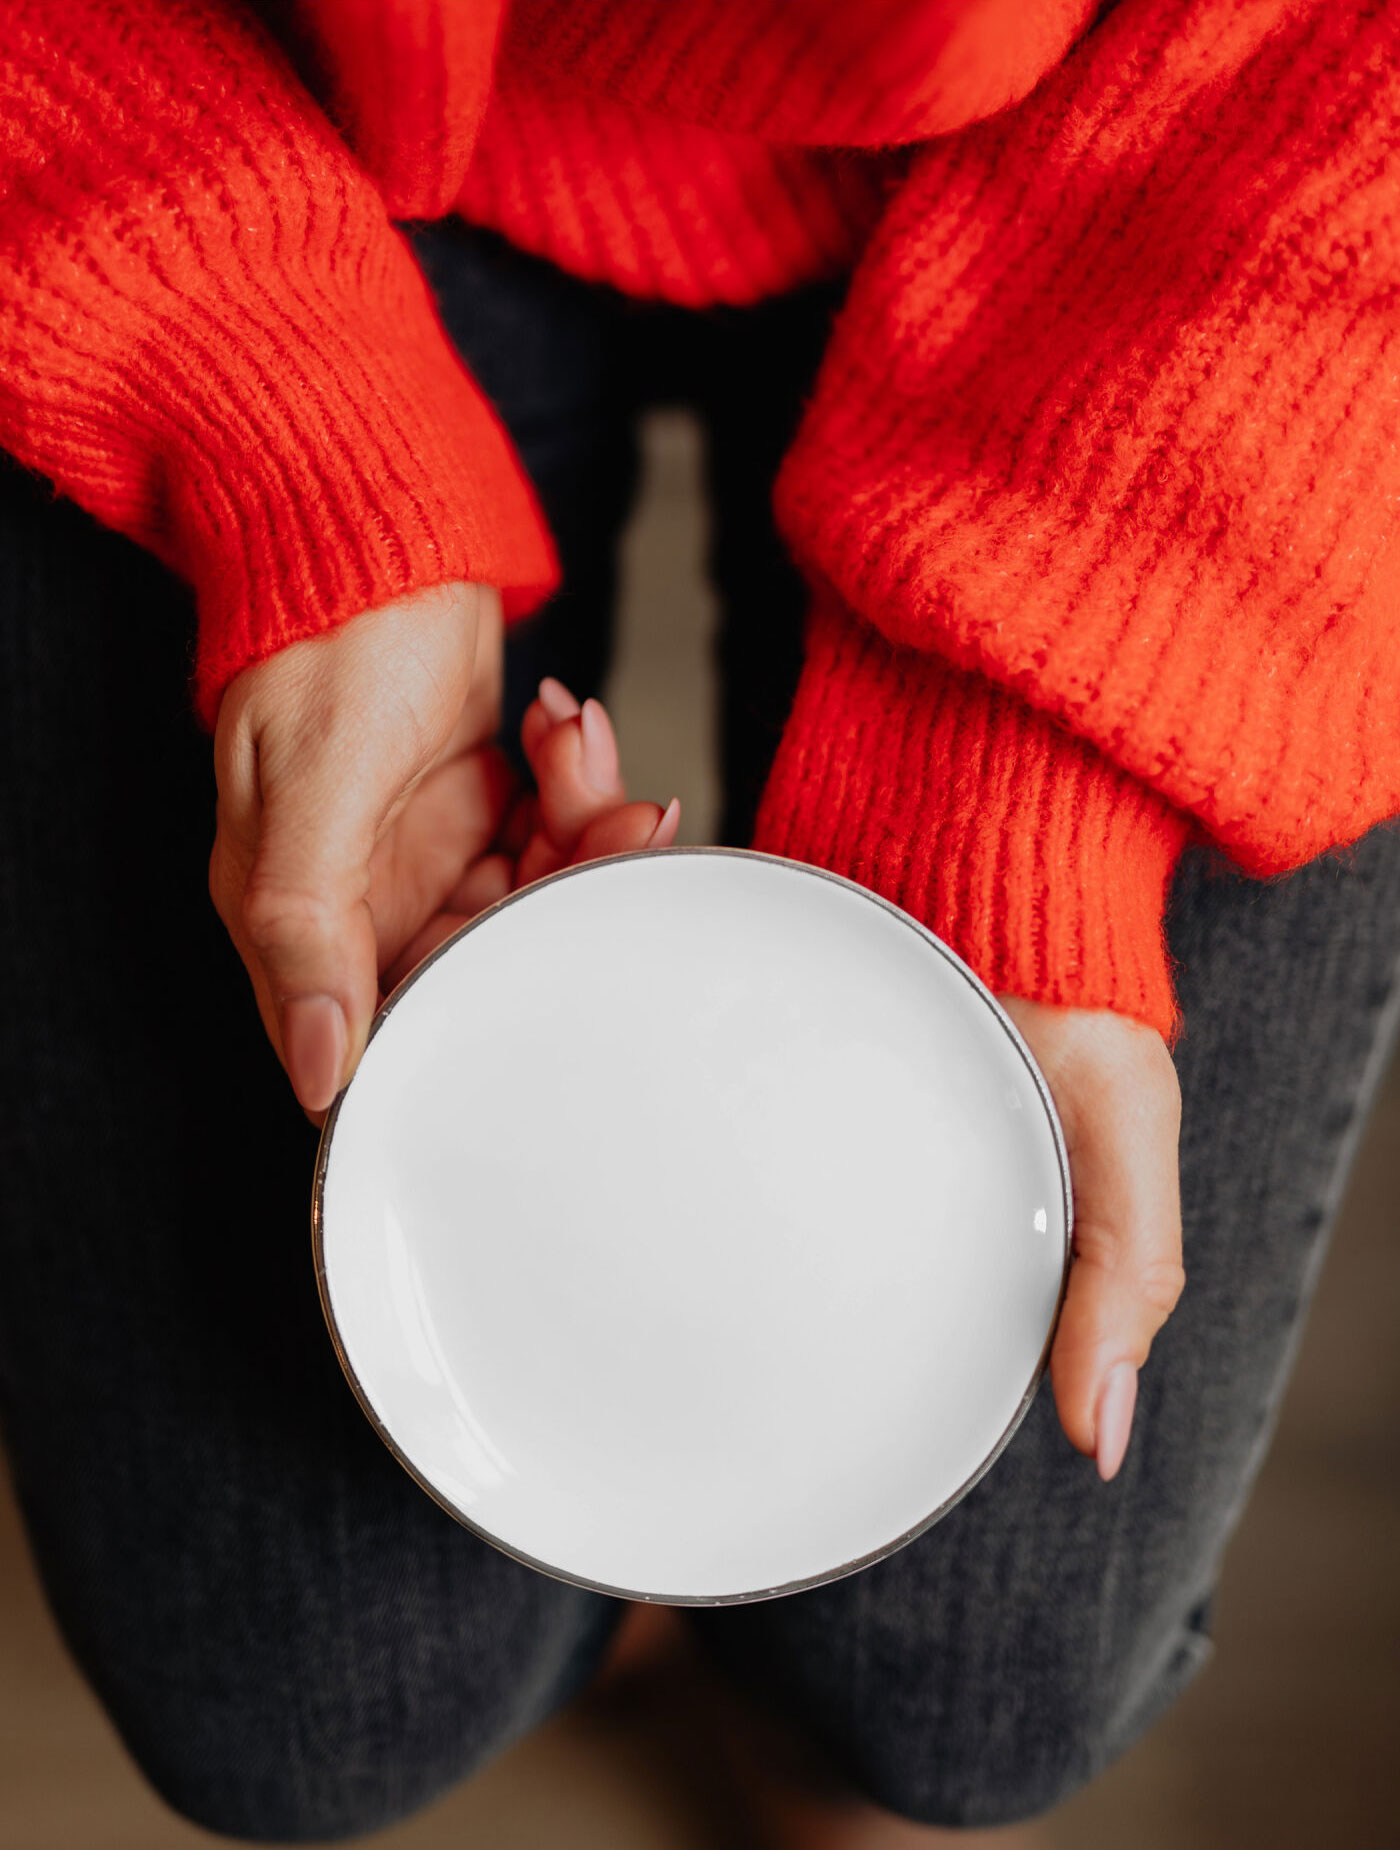 Plate Mockup in Female Hands FREE PSD